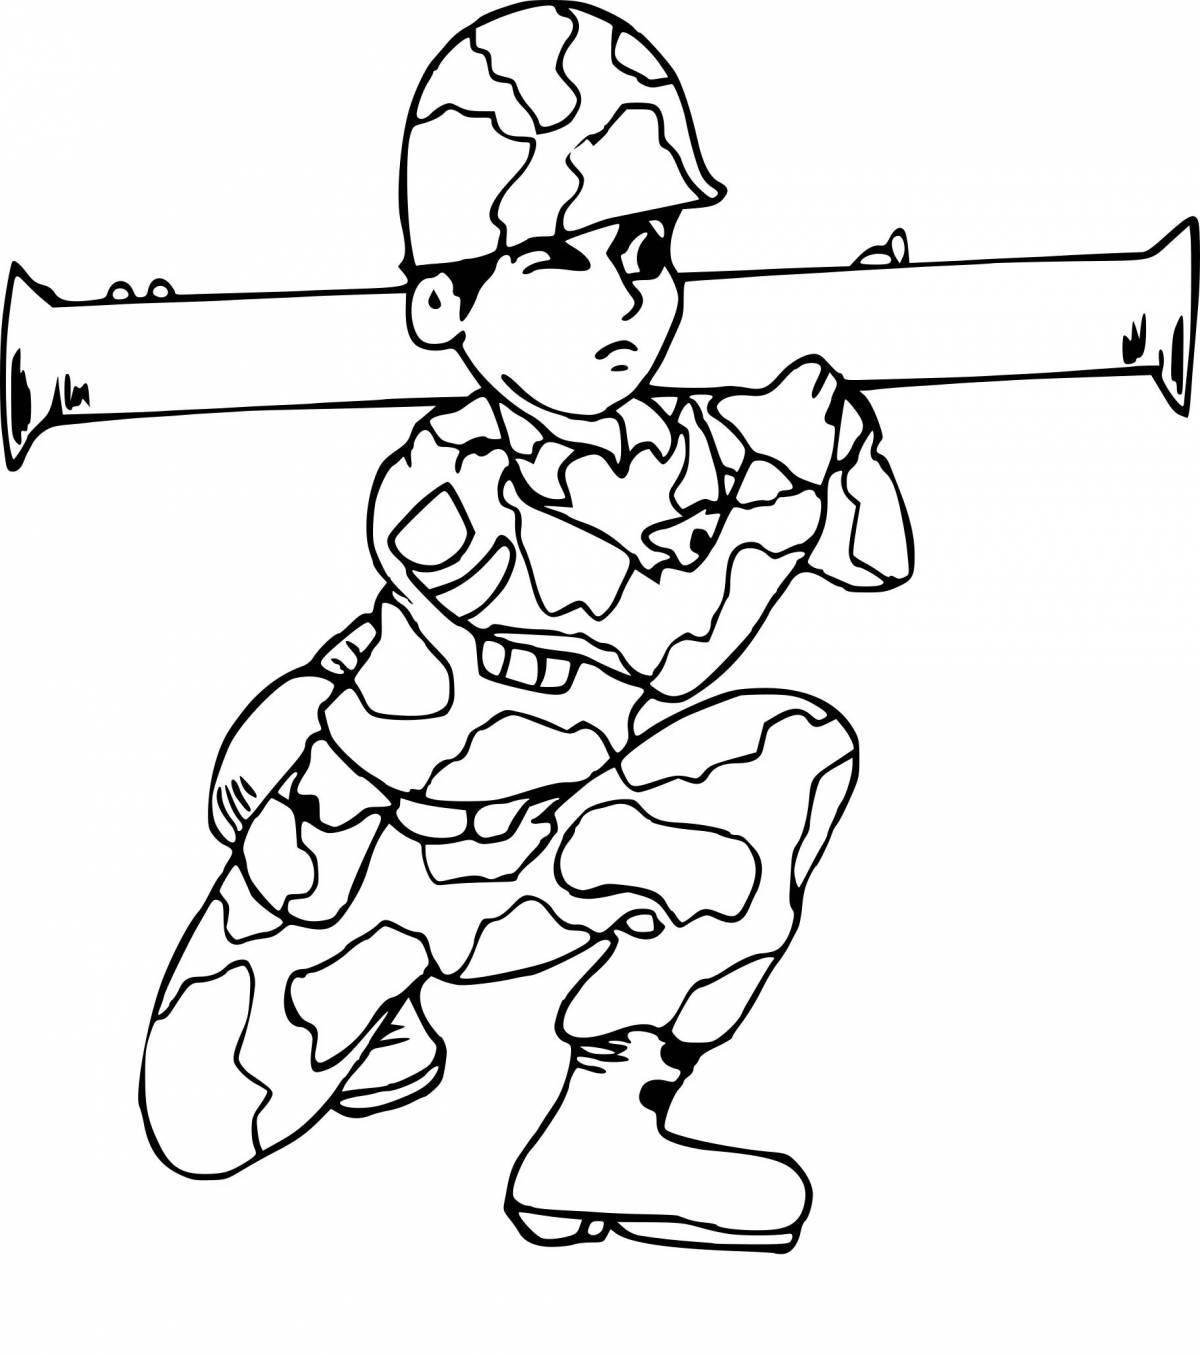 Coloring page cheeky tin soldier